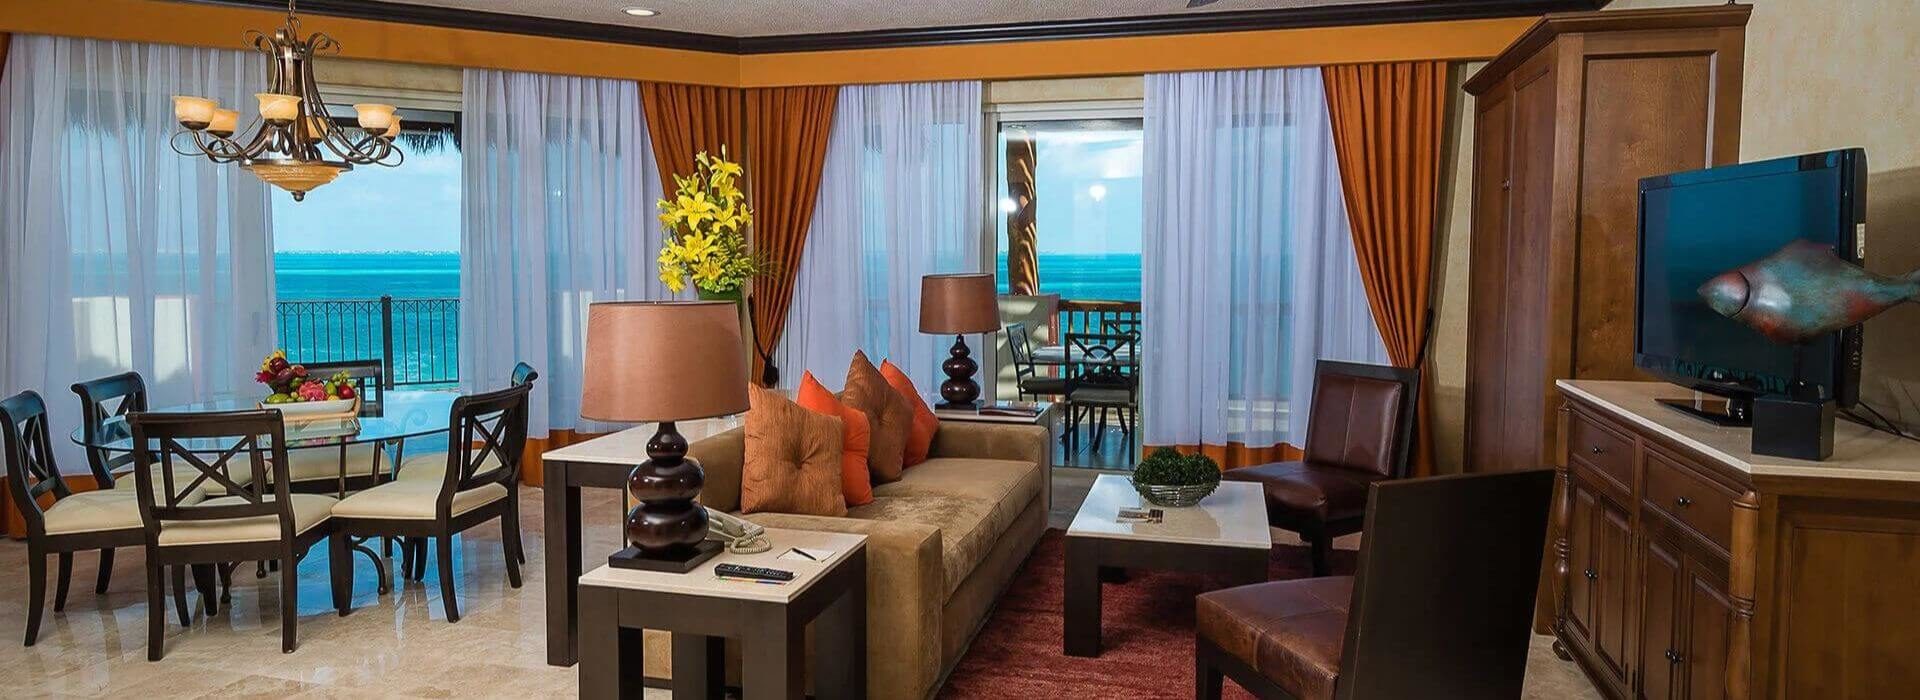 A comfortable living room with a plush sofa, two leather chairs, a marble coffee table and end tables, a hutch with a flat screen TV, a tall murphy bed, and dining area with a round glass table and several dining chairs. Sliding doors on two sides lead out to a wrap around terrace outdoor furniture and sweeping views of the turquoise Caribbean sea.